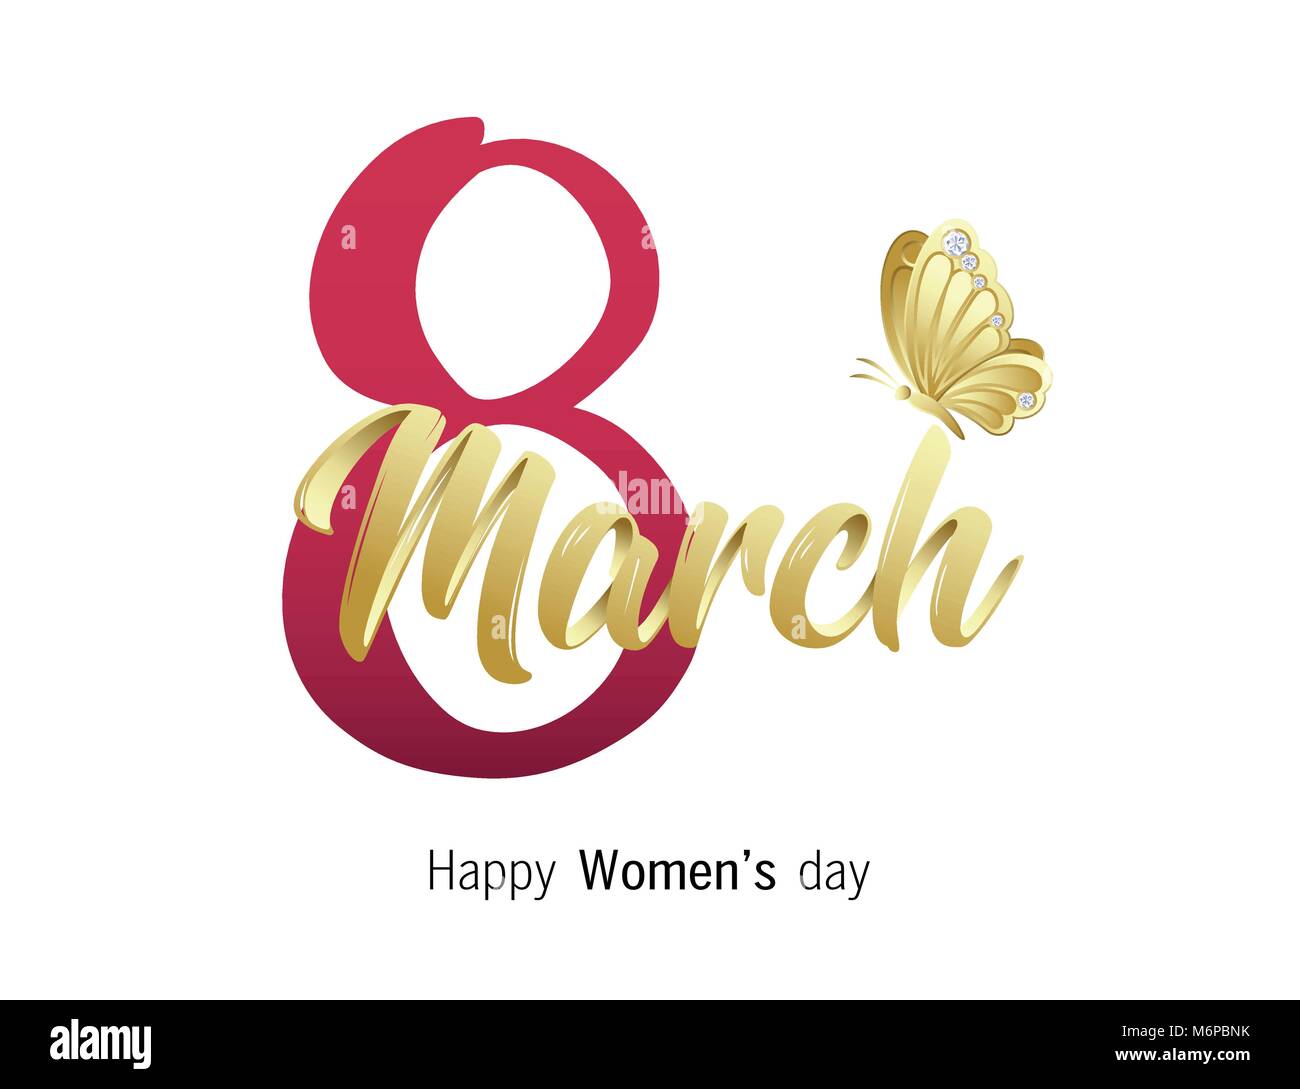 8 March. Happy Women's day greeting card with elegant Handwritten Script, golden butterfly and diamond stones. Vector illustration. Stock Vector